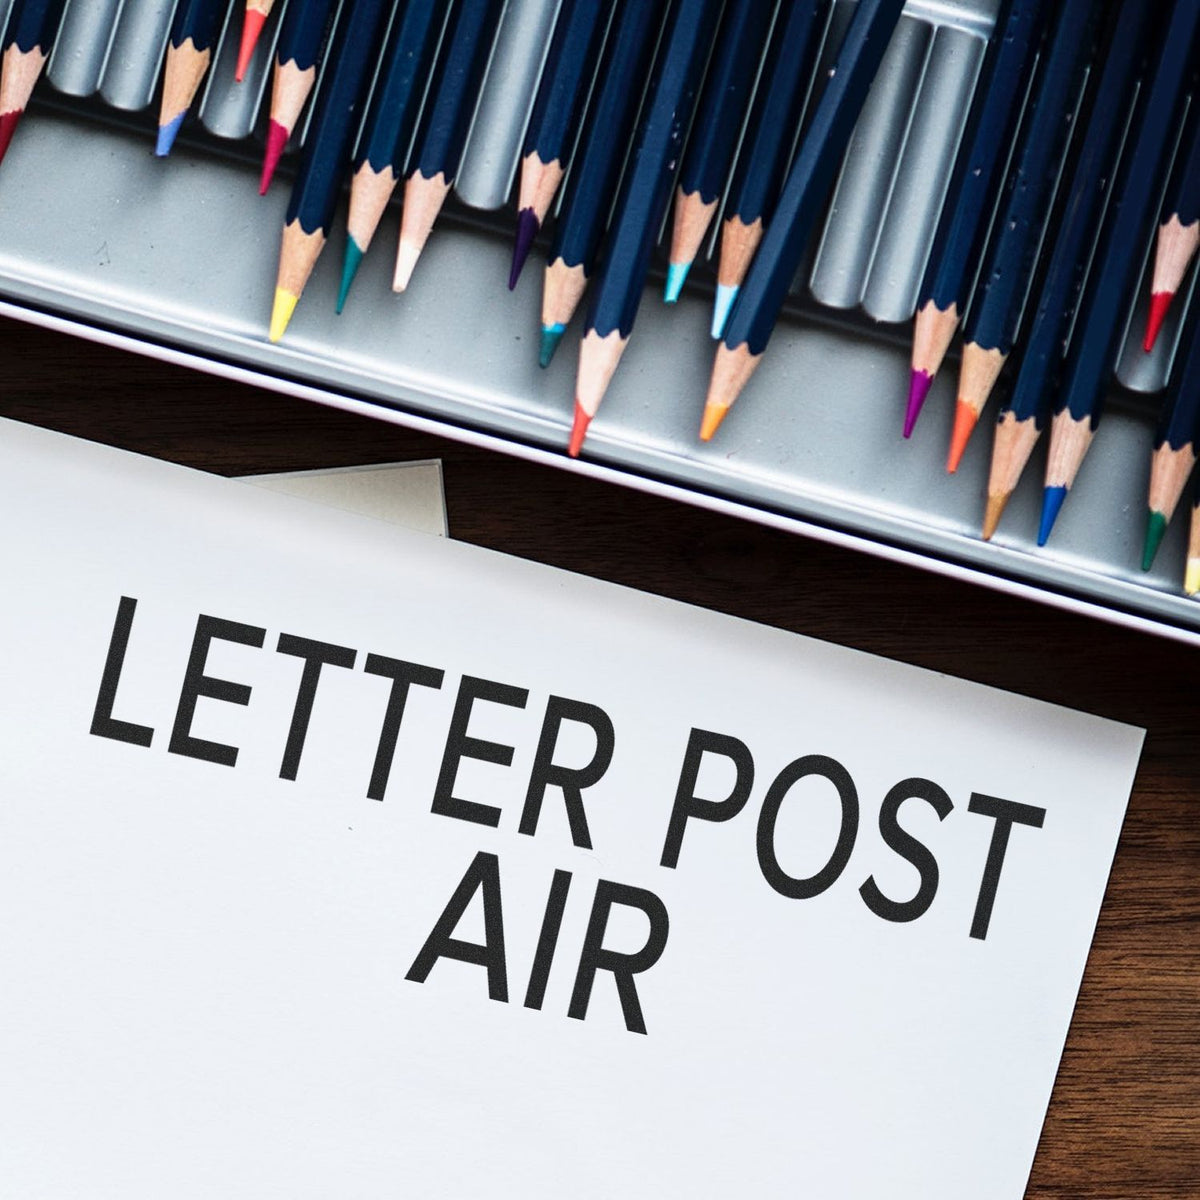 Letter Post Air Rubber Stamp Lifestyle Photo